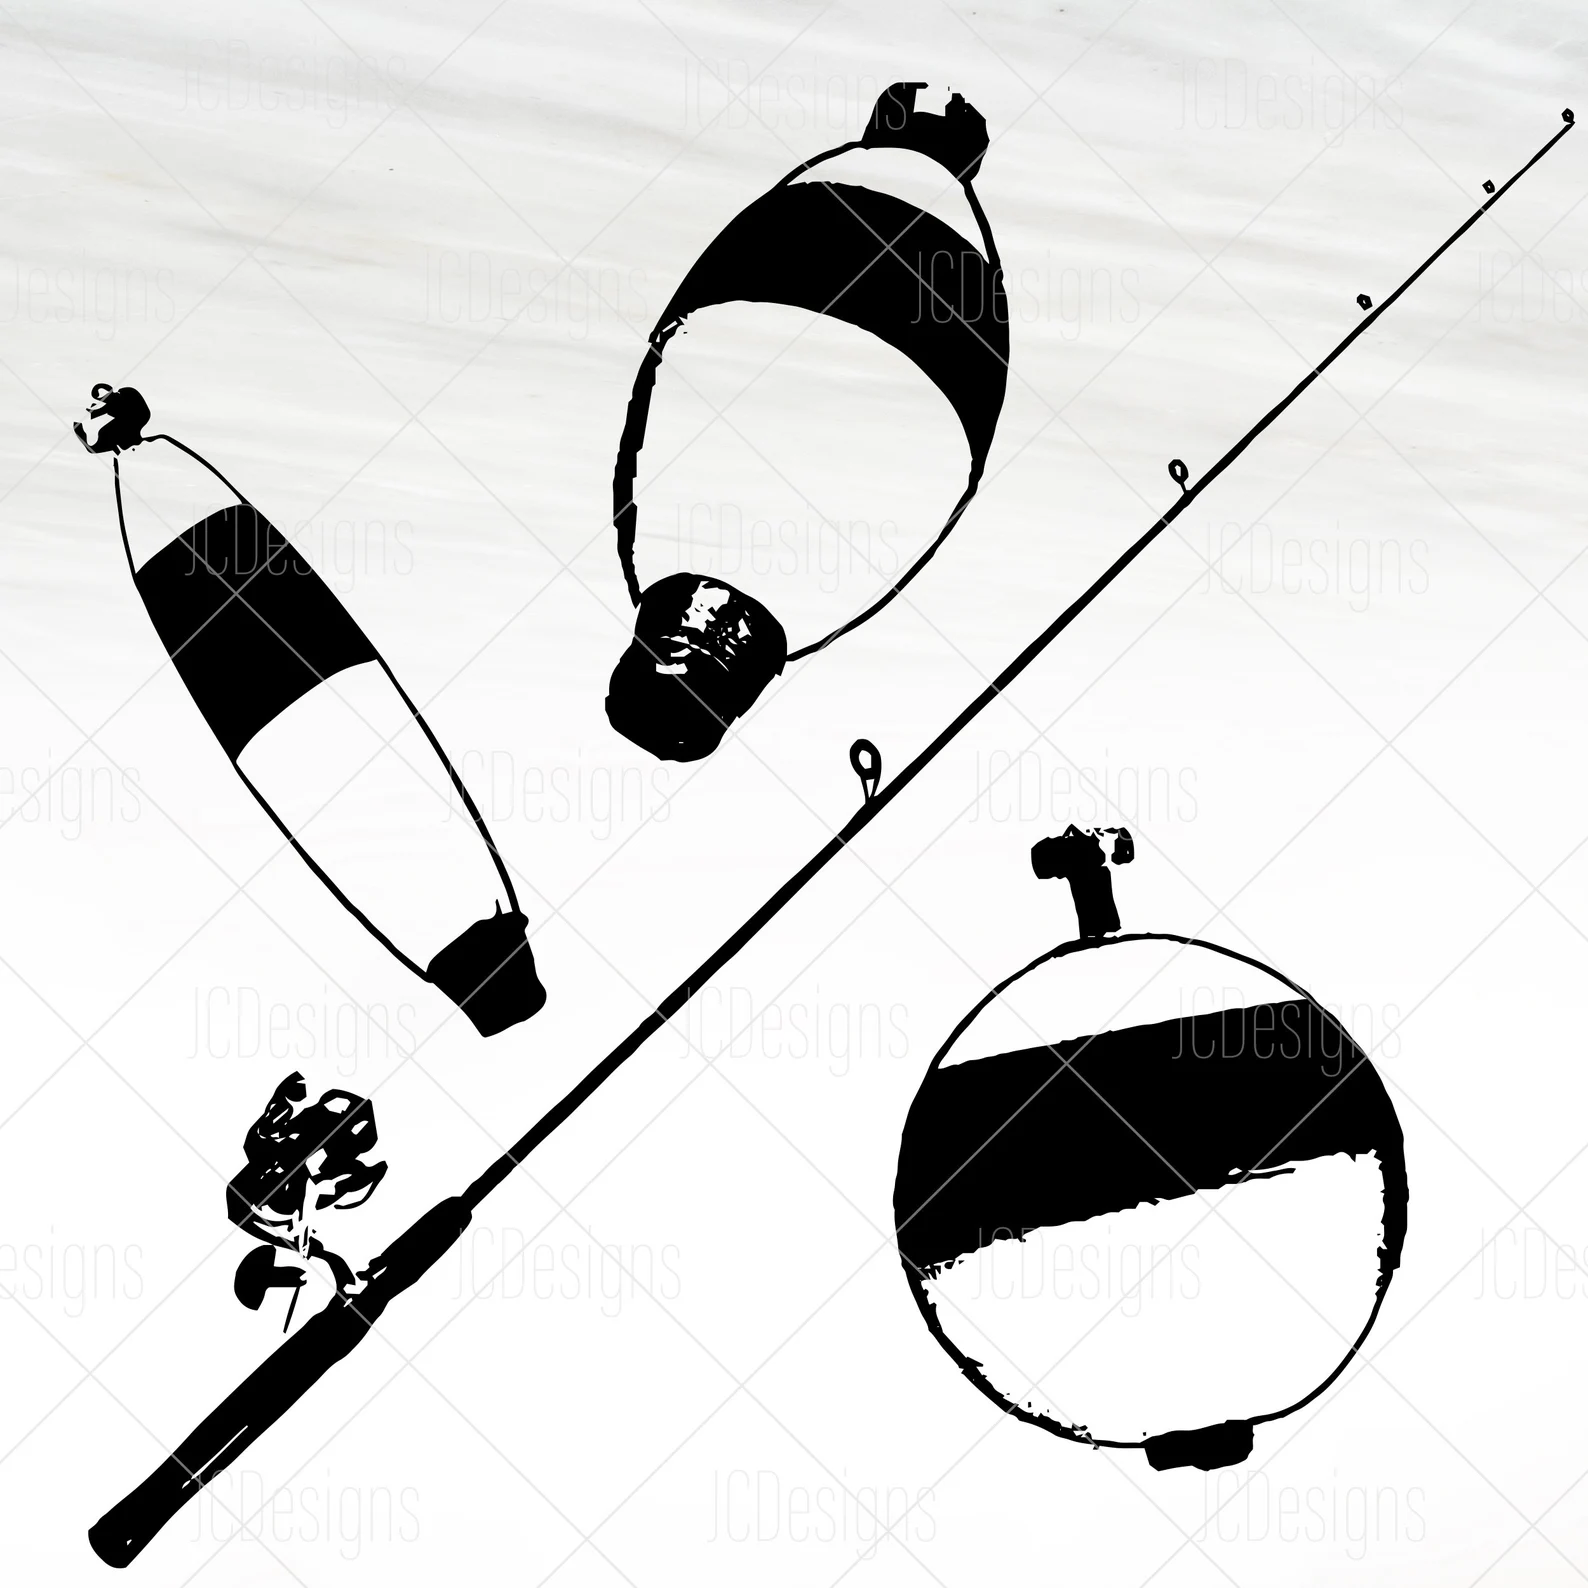 Some elements for the success fishing.